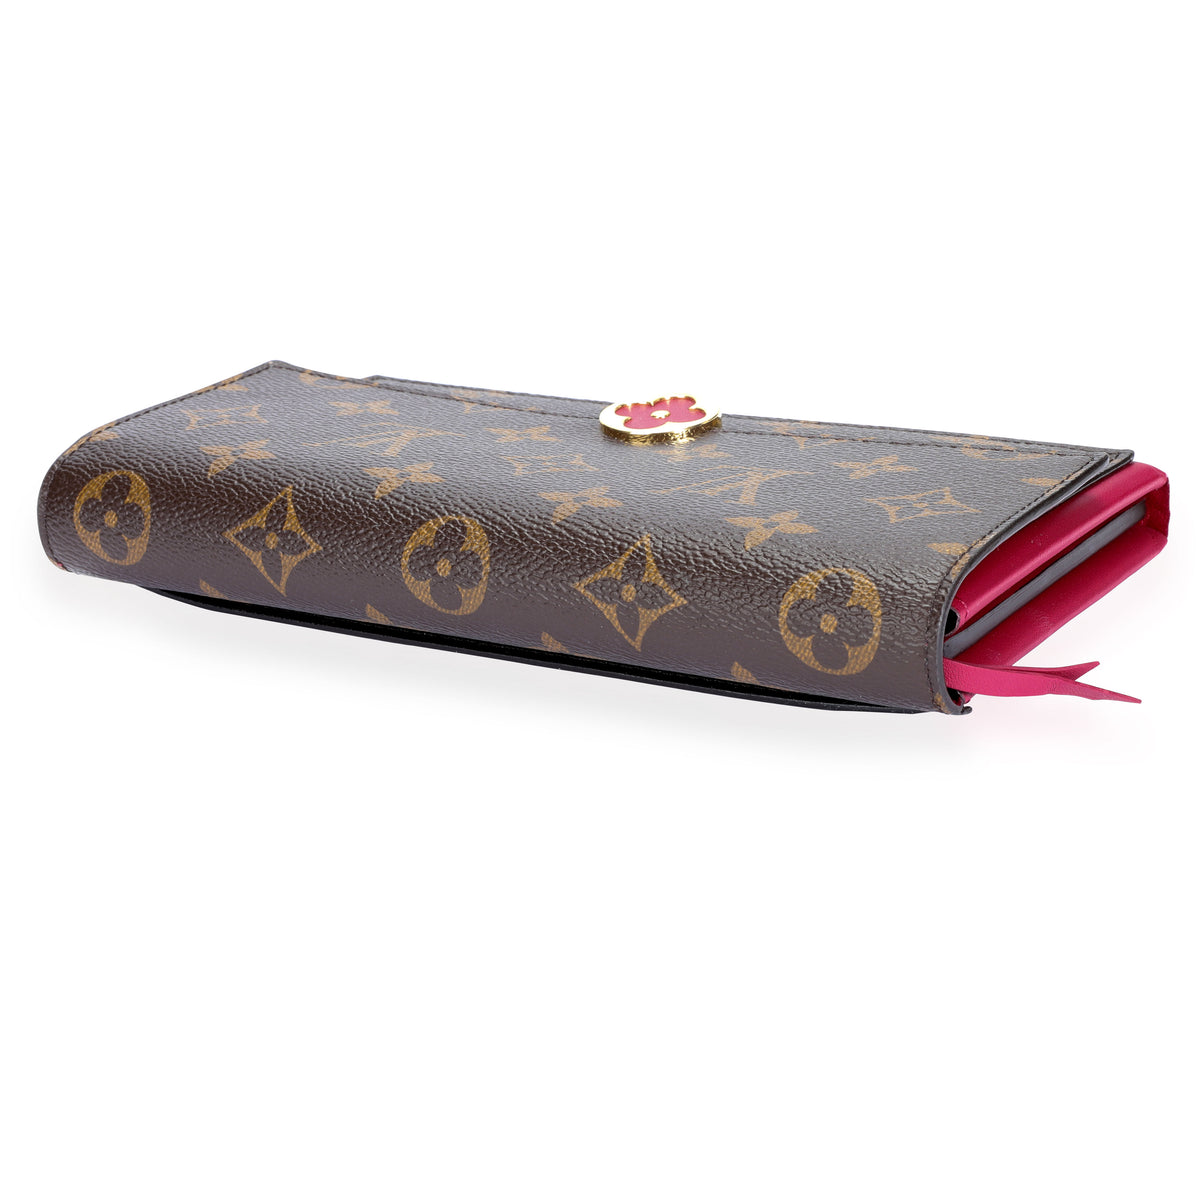 Louis Vuitton Flore Monogram Canvas and Leather Wallet on Chain